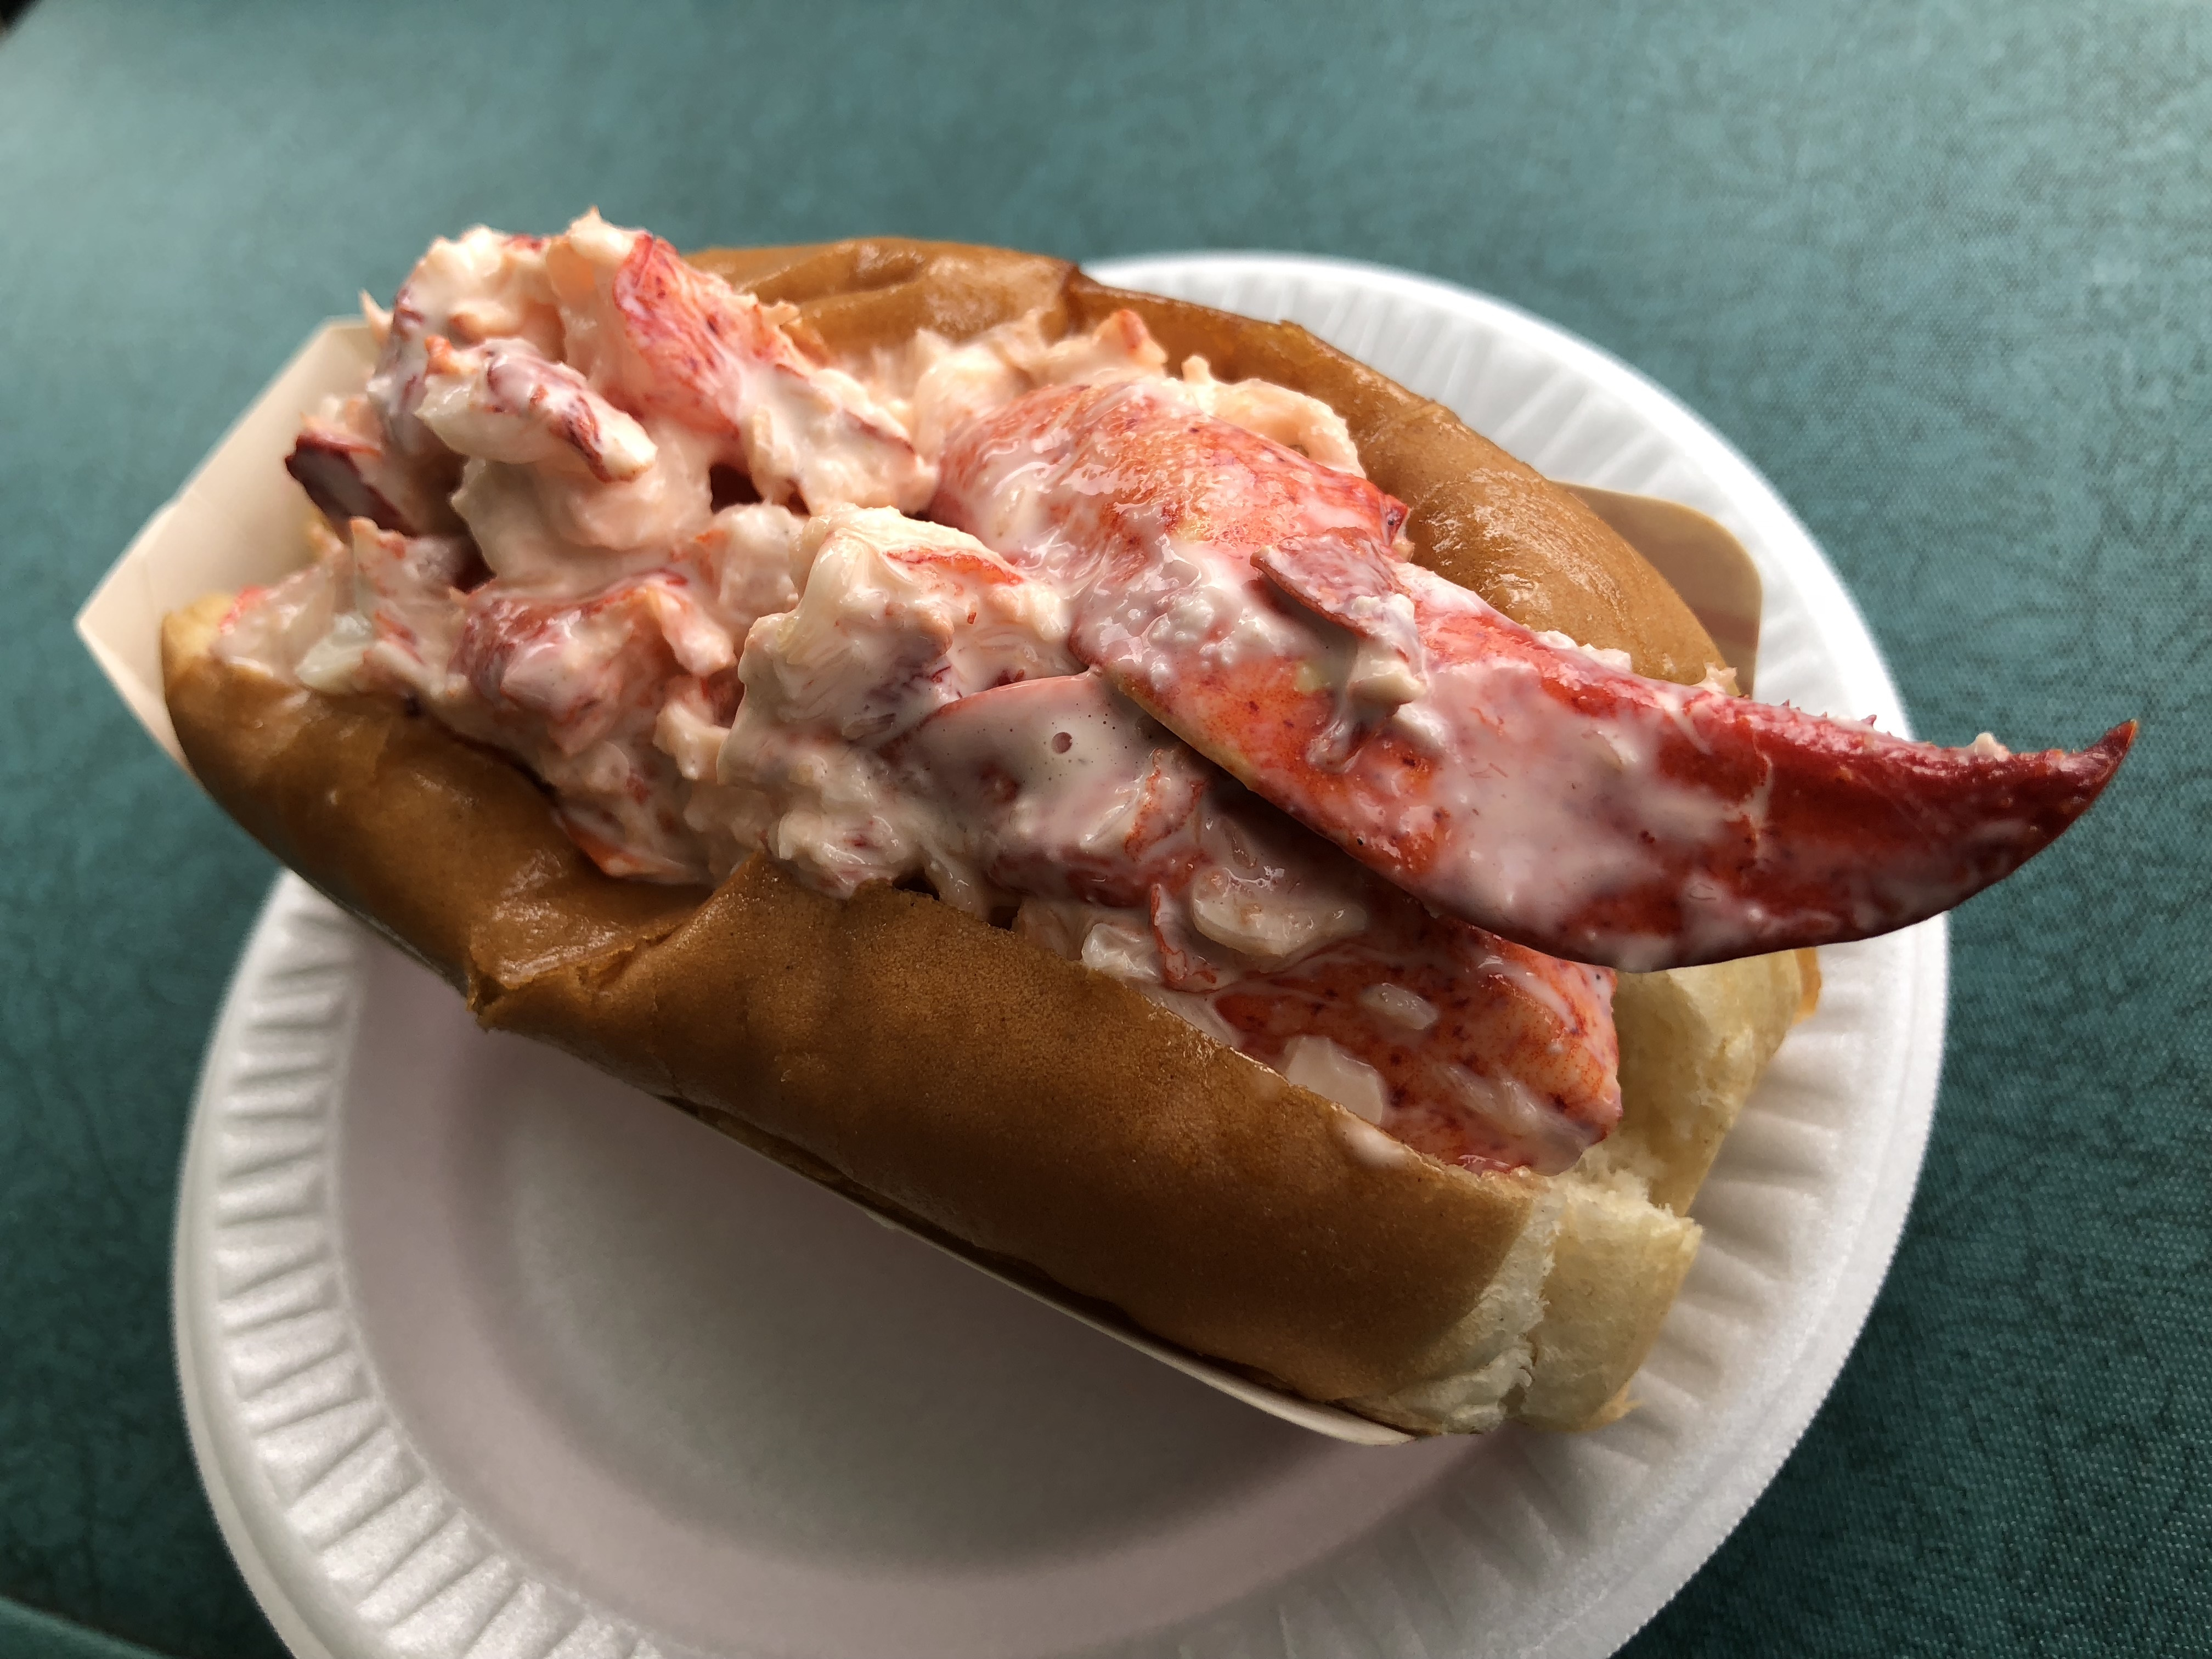 PHOTOS: Plymouth's Lobster Hut, a Classic New England Seafood Spot